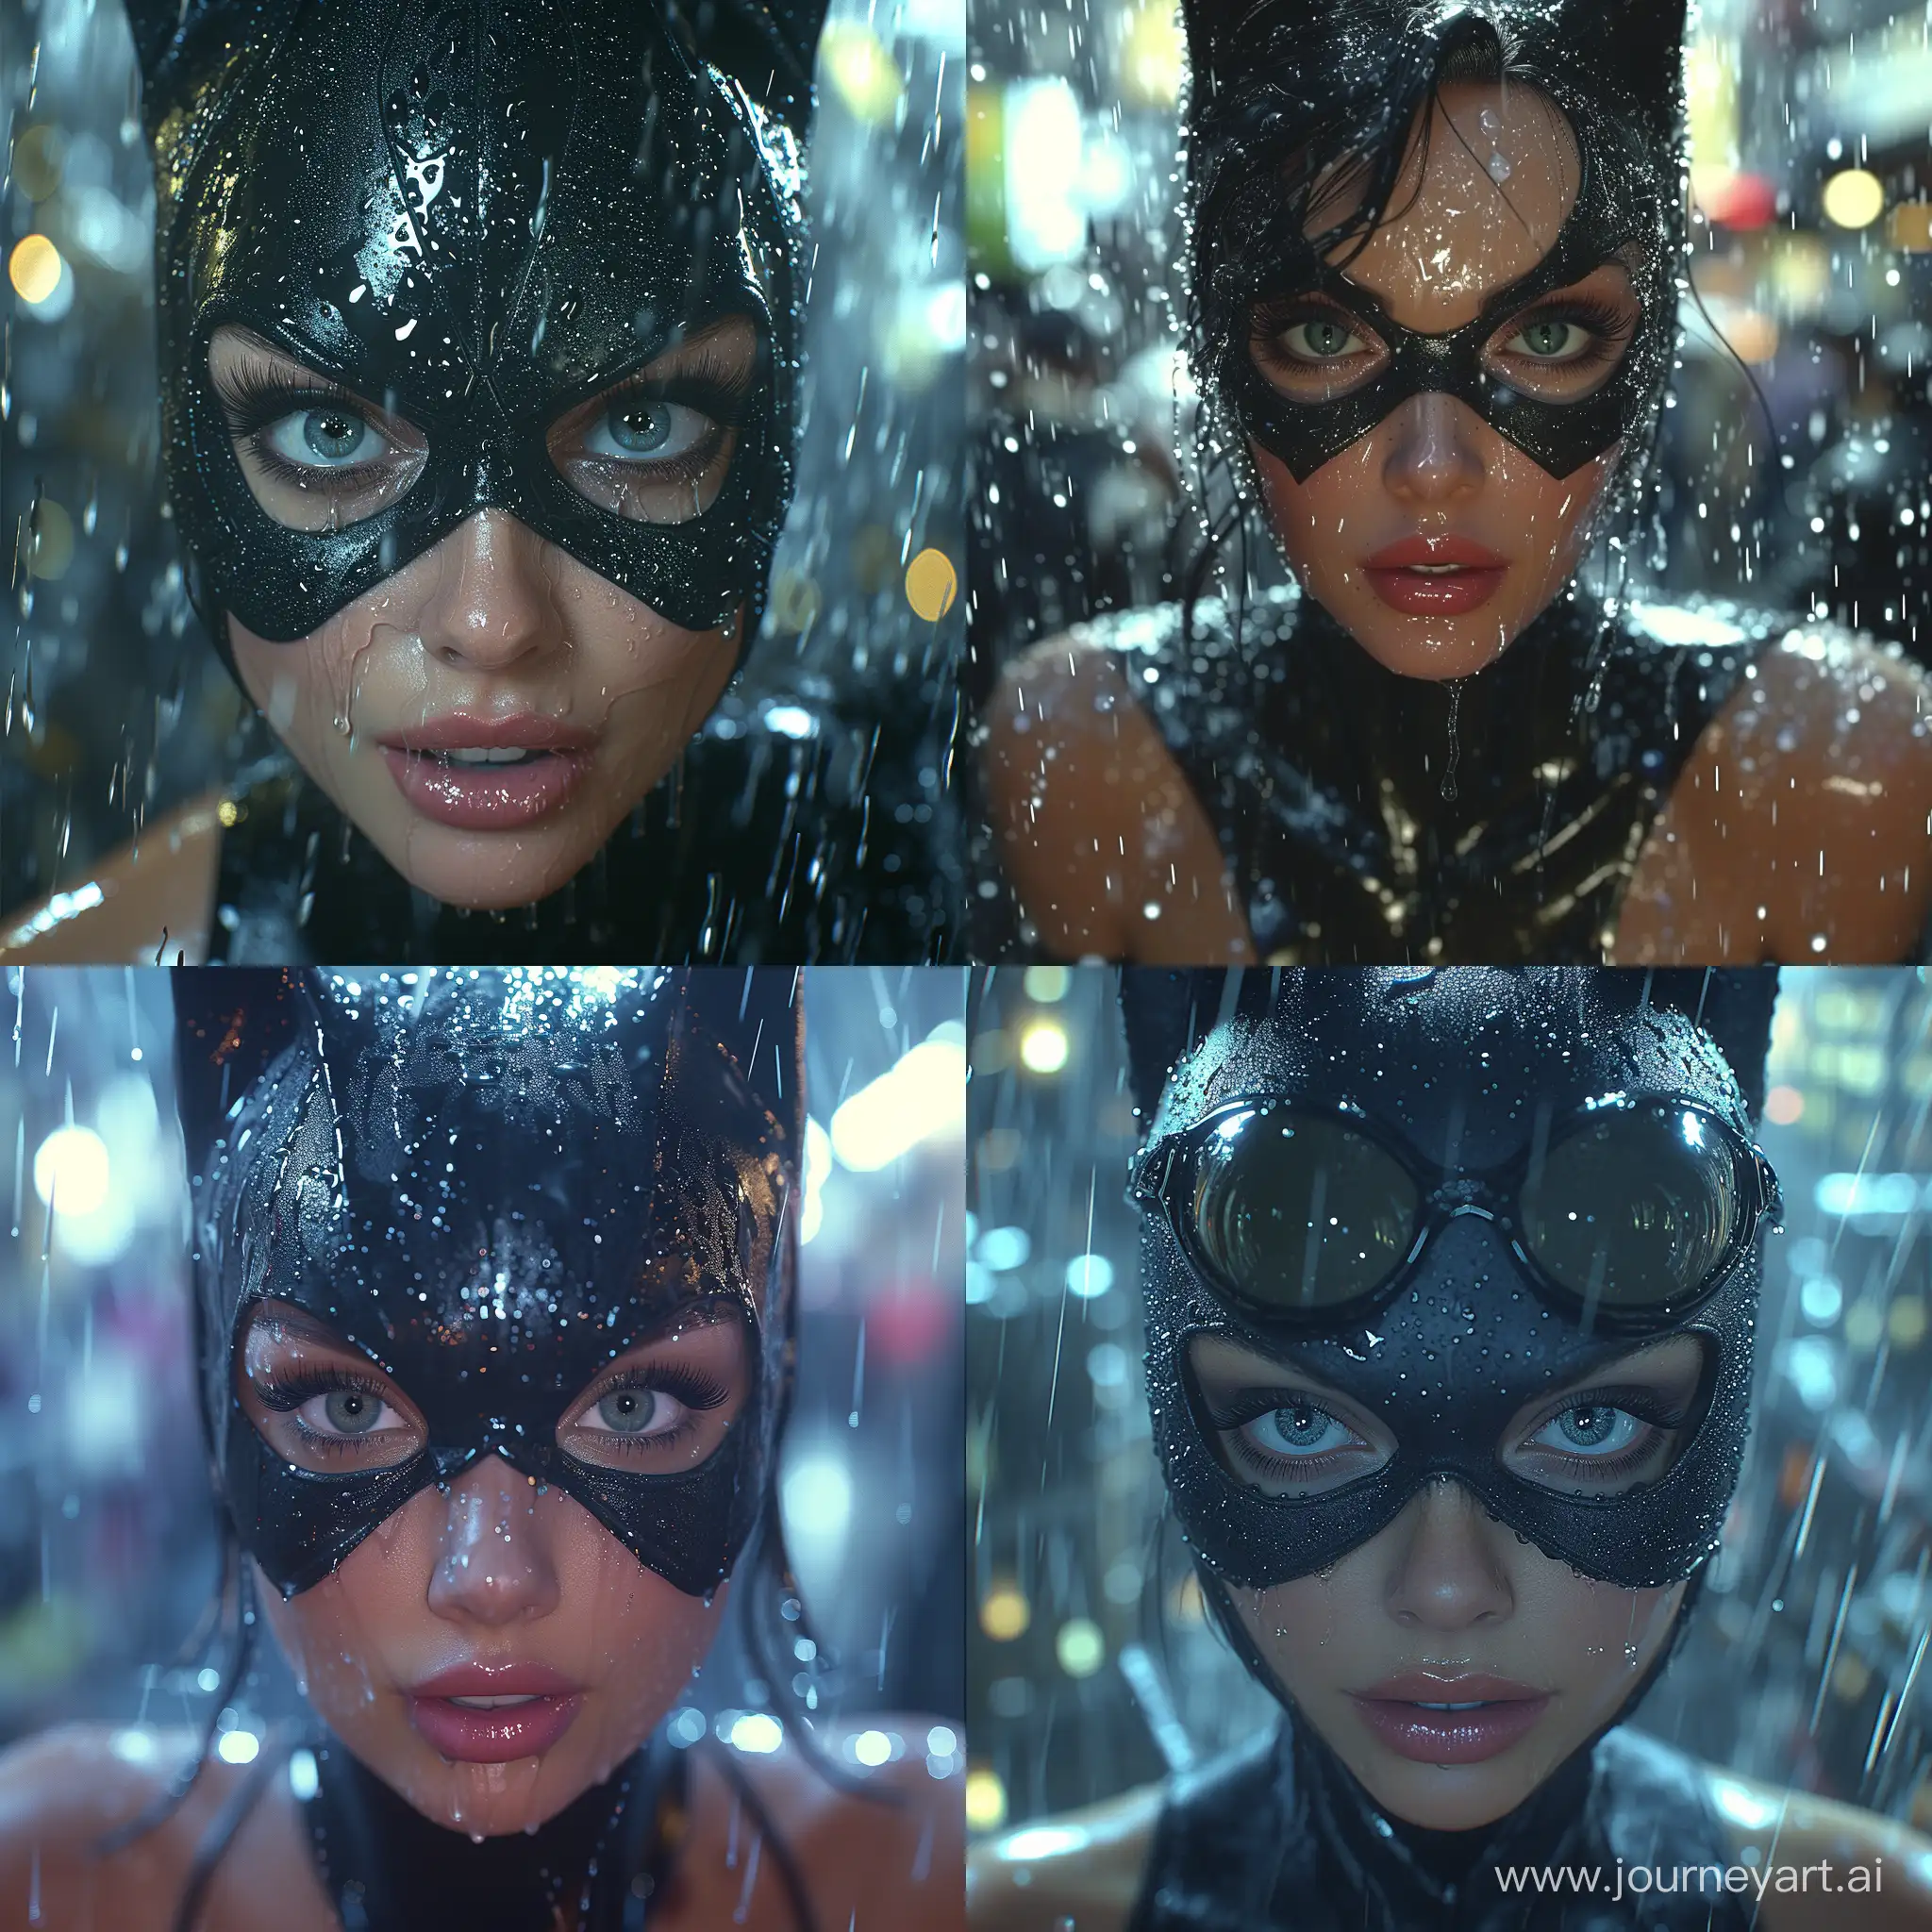 Create a realistic and dynamic image of Catwoman in Gotham City, with a close-up depth of field, set in the rain. The image should capture the essence of Gotham City's atmosphere and Catwoman's character, incorporating a stylized approach. Pay attention to detail and realism, and ensure that the image conveys a sense of drama and intrigue --stylize 750 --v 6